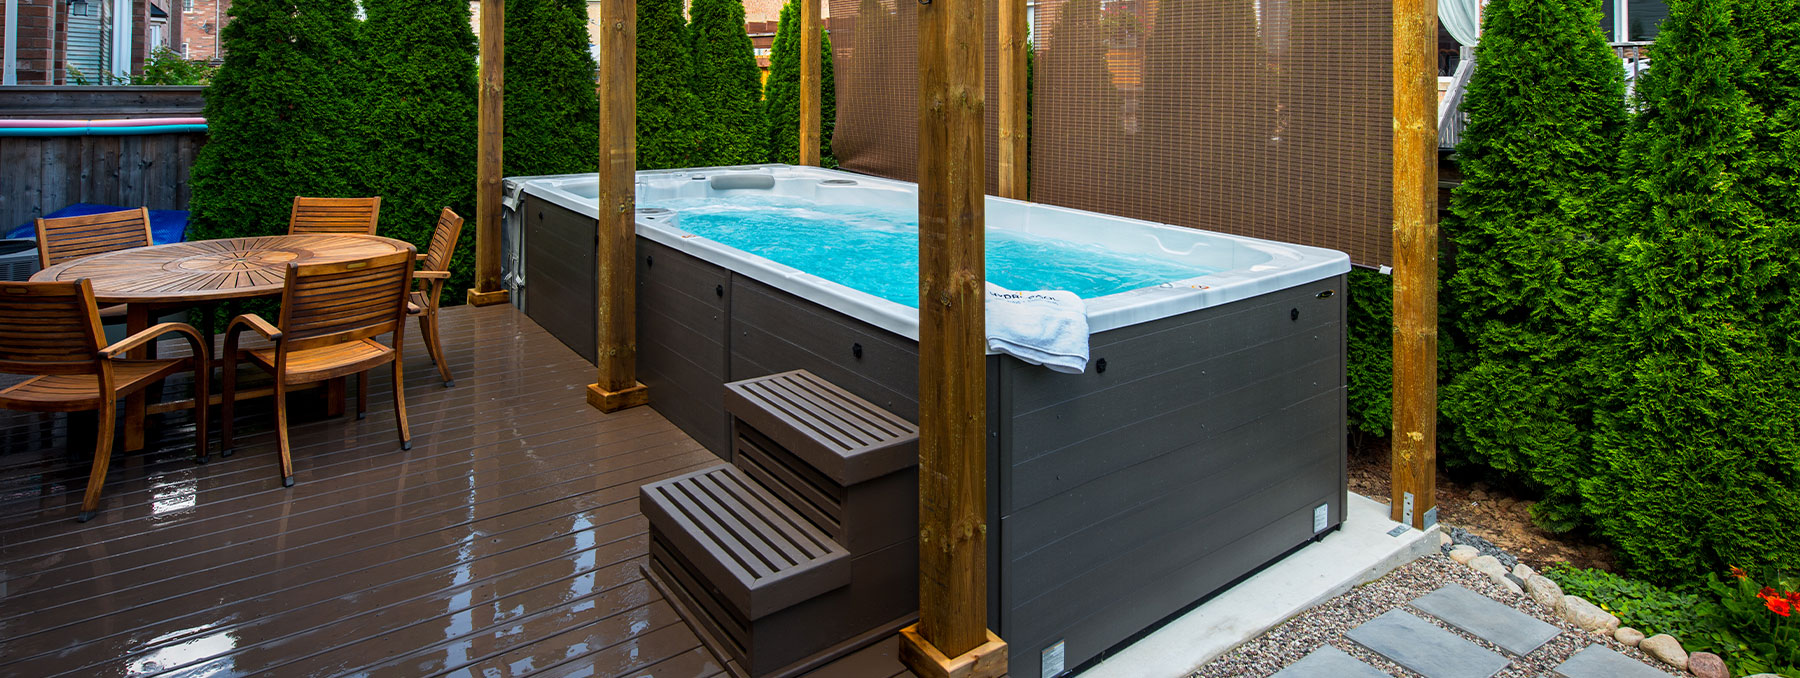 What is the energy consumption of a swim spa and are there energy-saving features available?